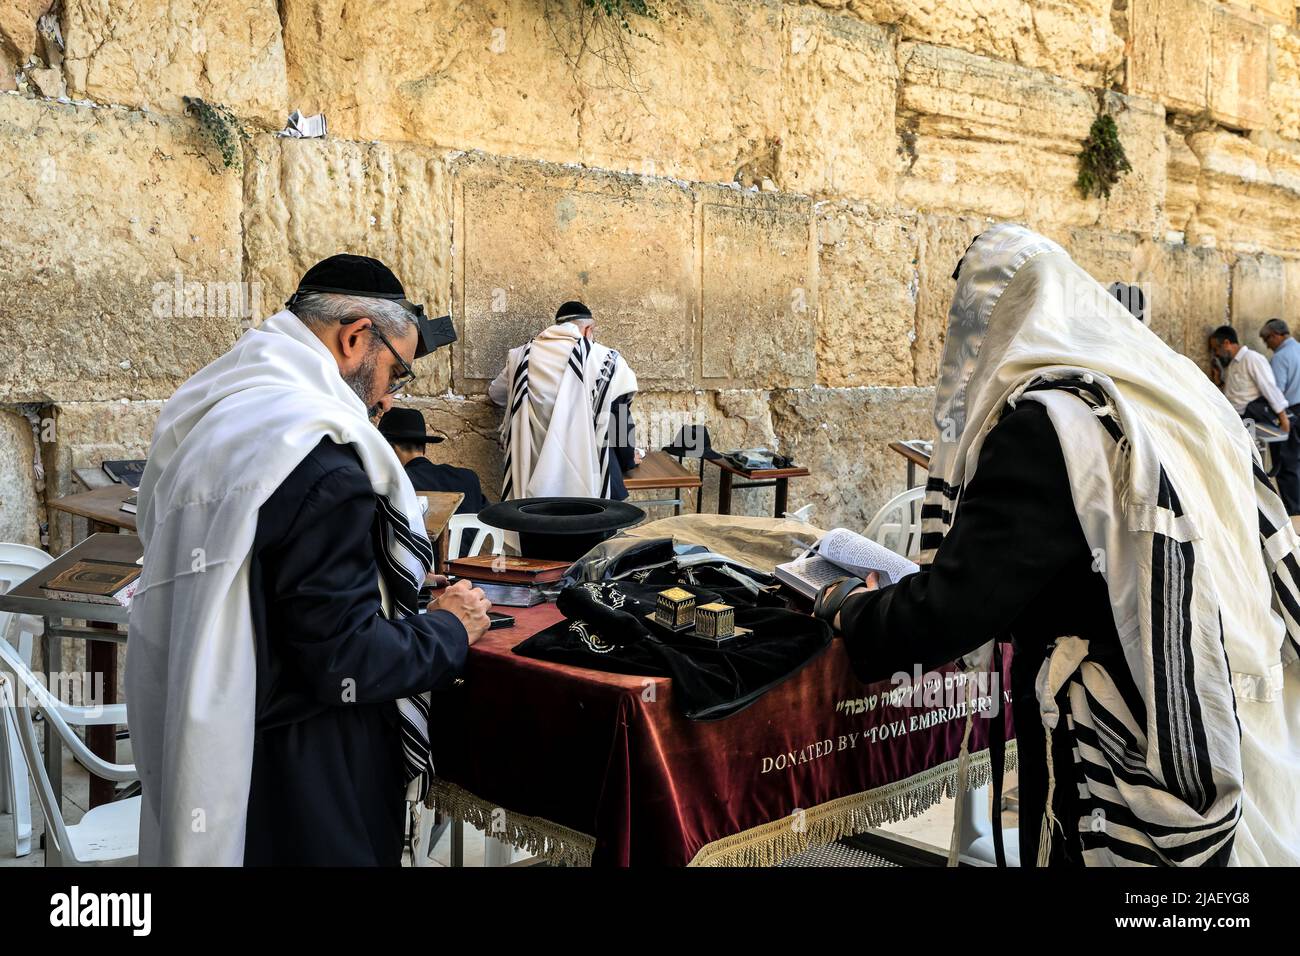 Religious men with tefillin  and covered with tallit praying at the Wailing Wall in Jerusalem, Israel. Stock Photo